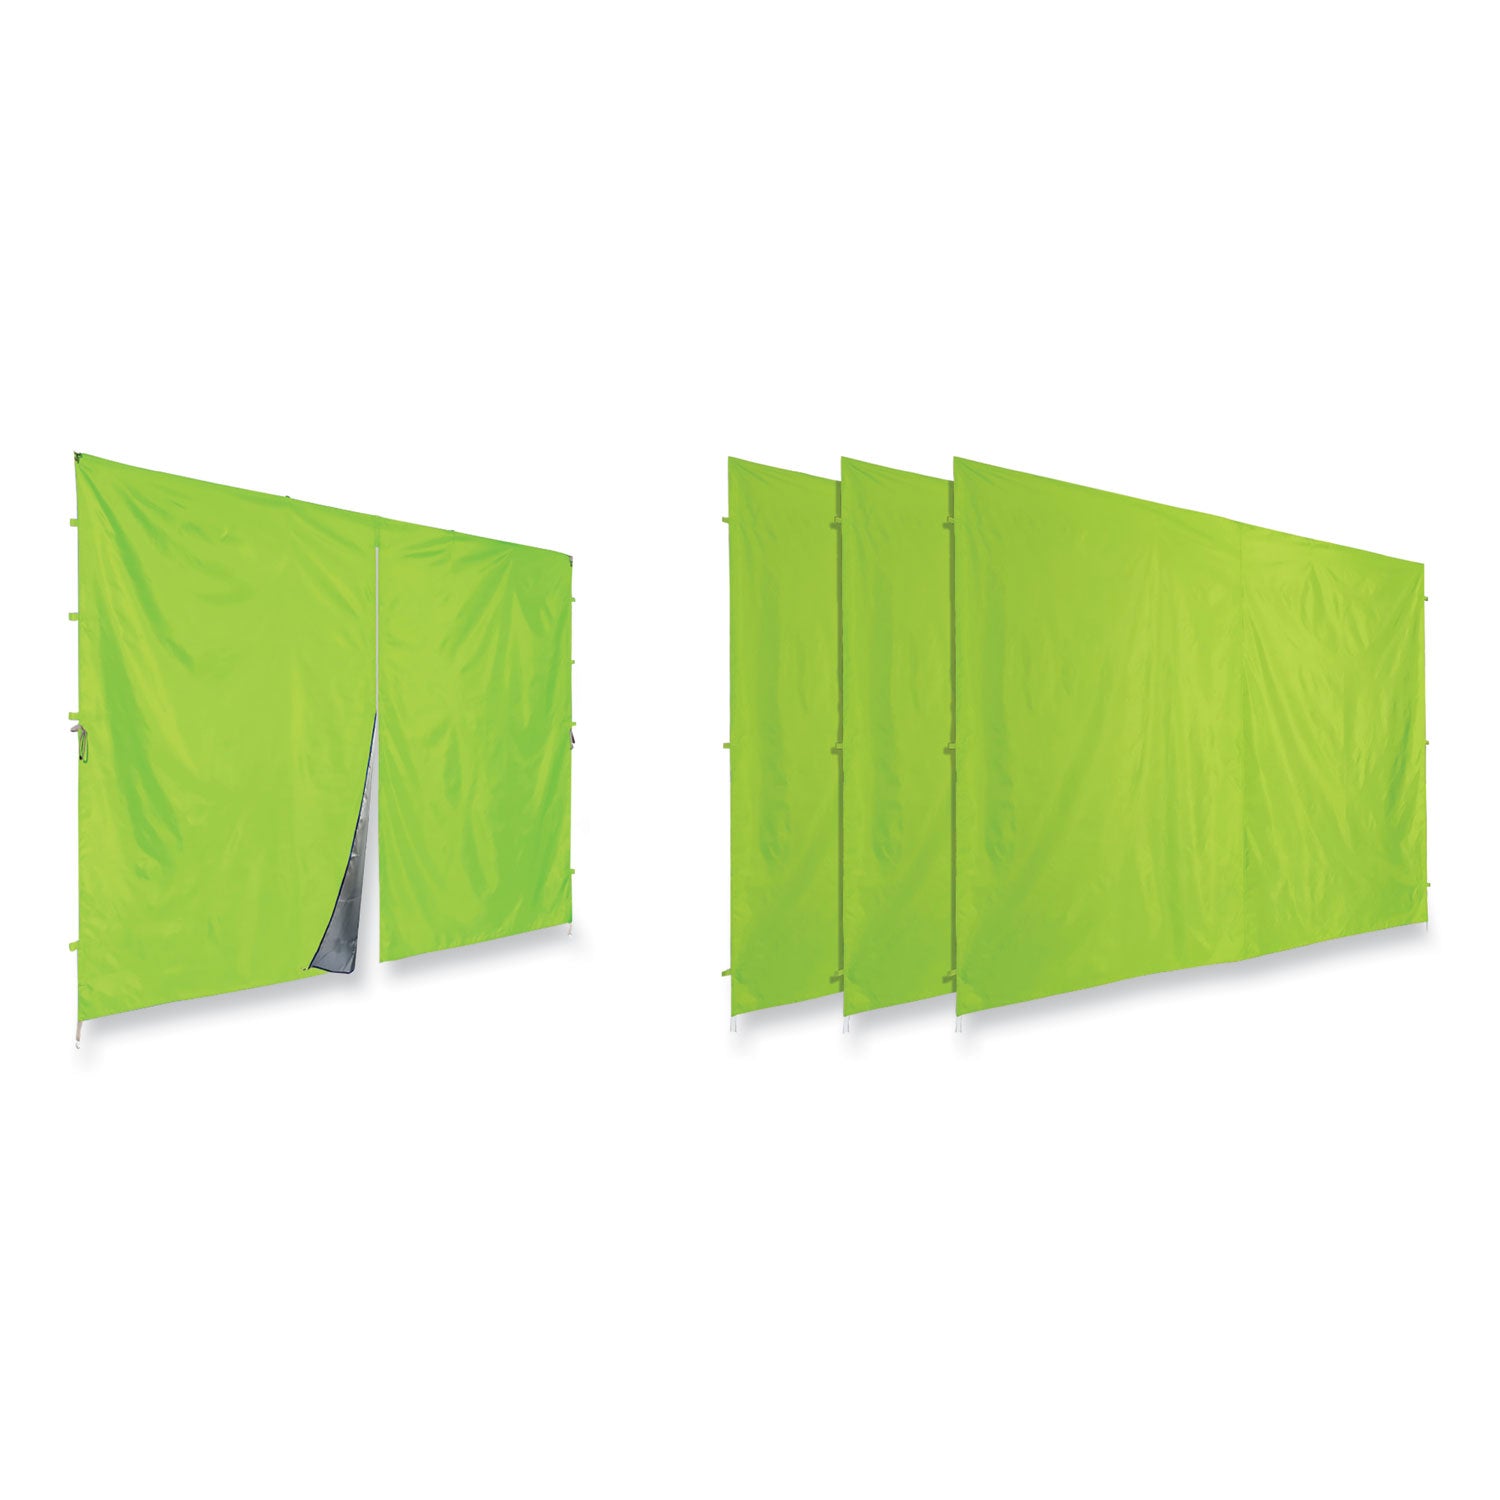 shax-6054-pop-up-tent-sidewall-kit-single-skin-10-ft-x-10-ft-polyester-lime-ships-in-1-3-business-days_ego12984 - 2